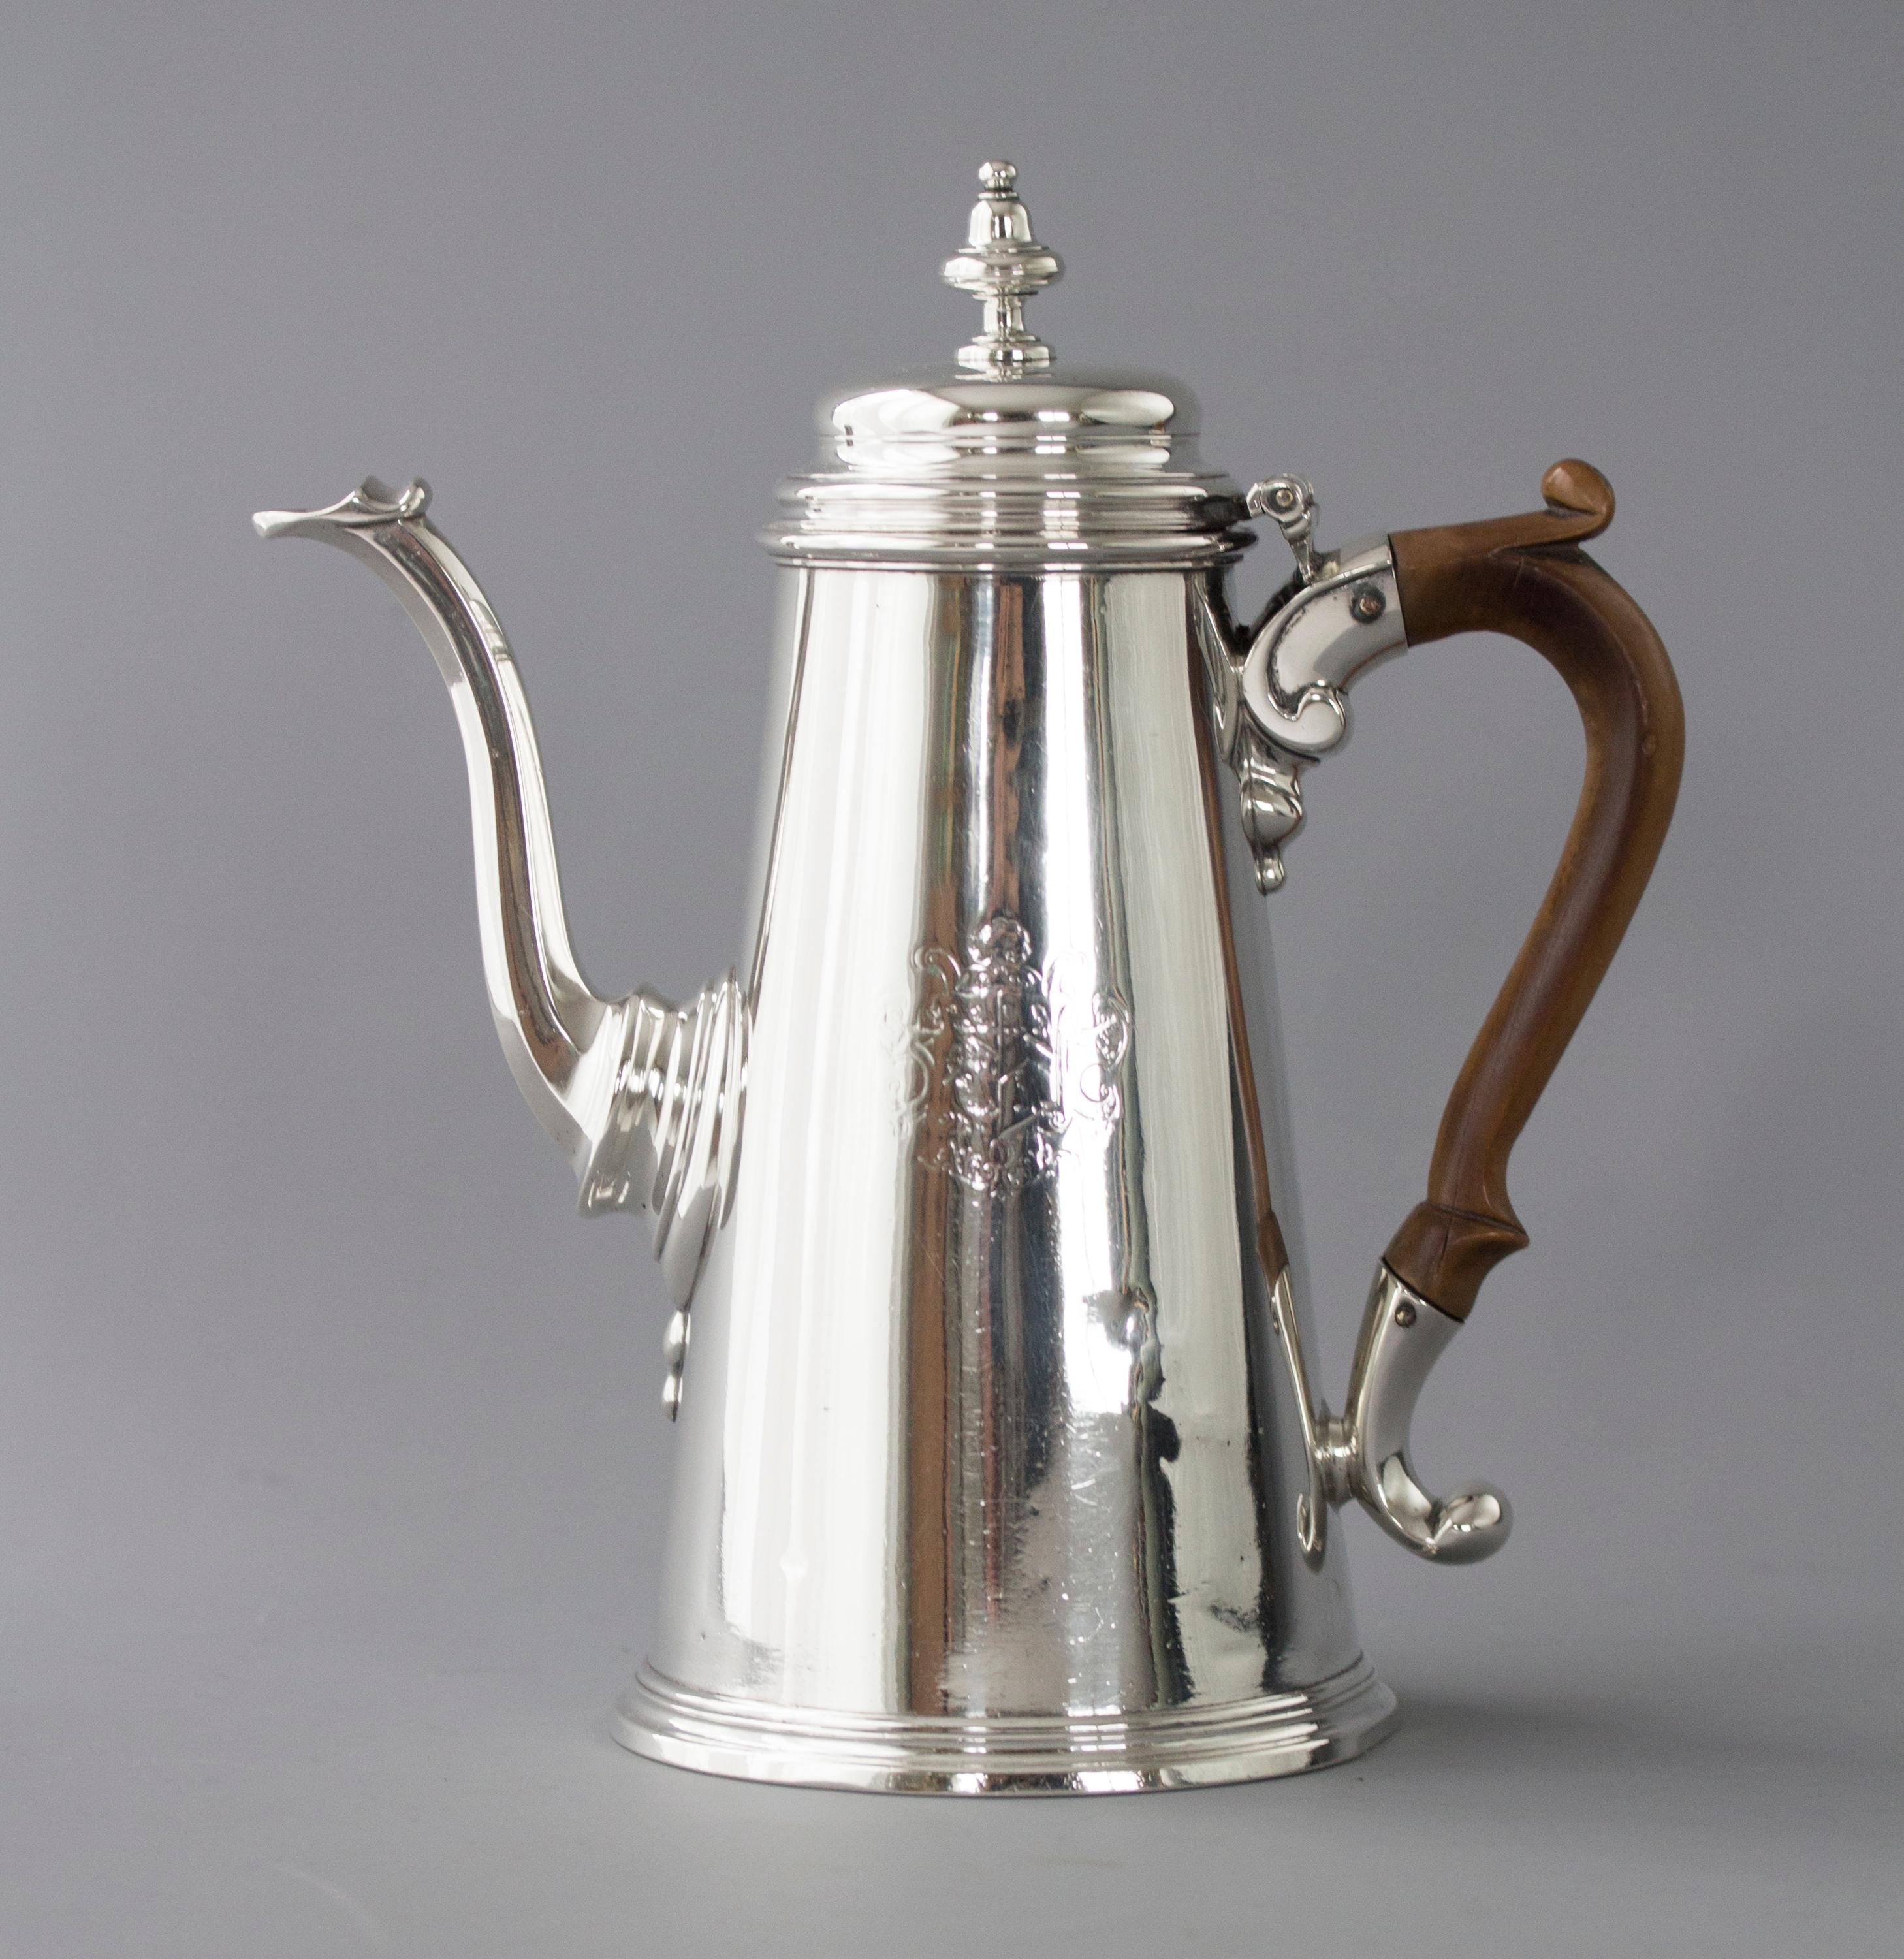 An early George II silver coffee pot. Of plain tapering form, with a raised, stepped lid topped with an acorn finial. Cast octagonal swan-neck spout, and a carved wooden handle set in scrolling mounts, all standing on a stepped based. Engraved to